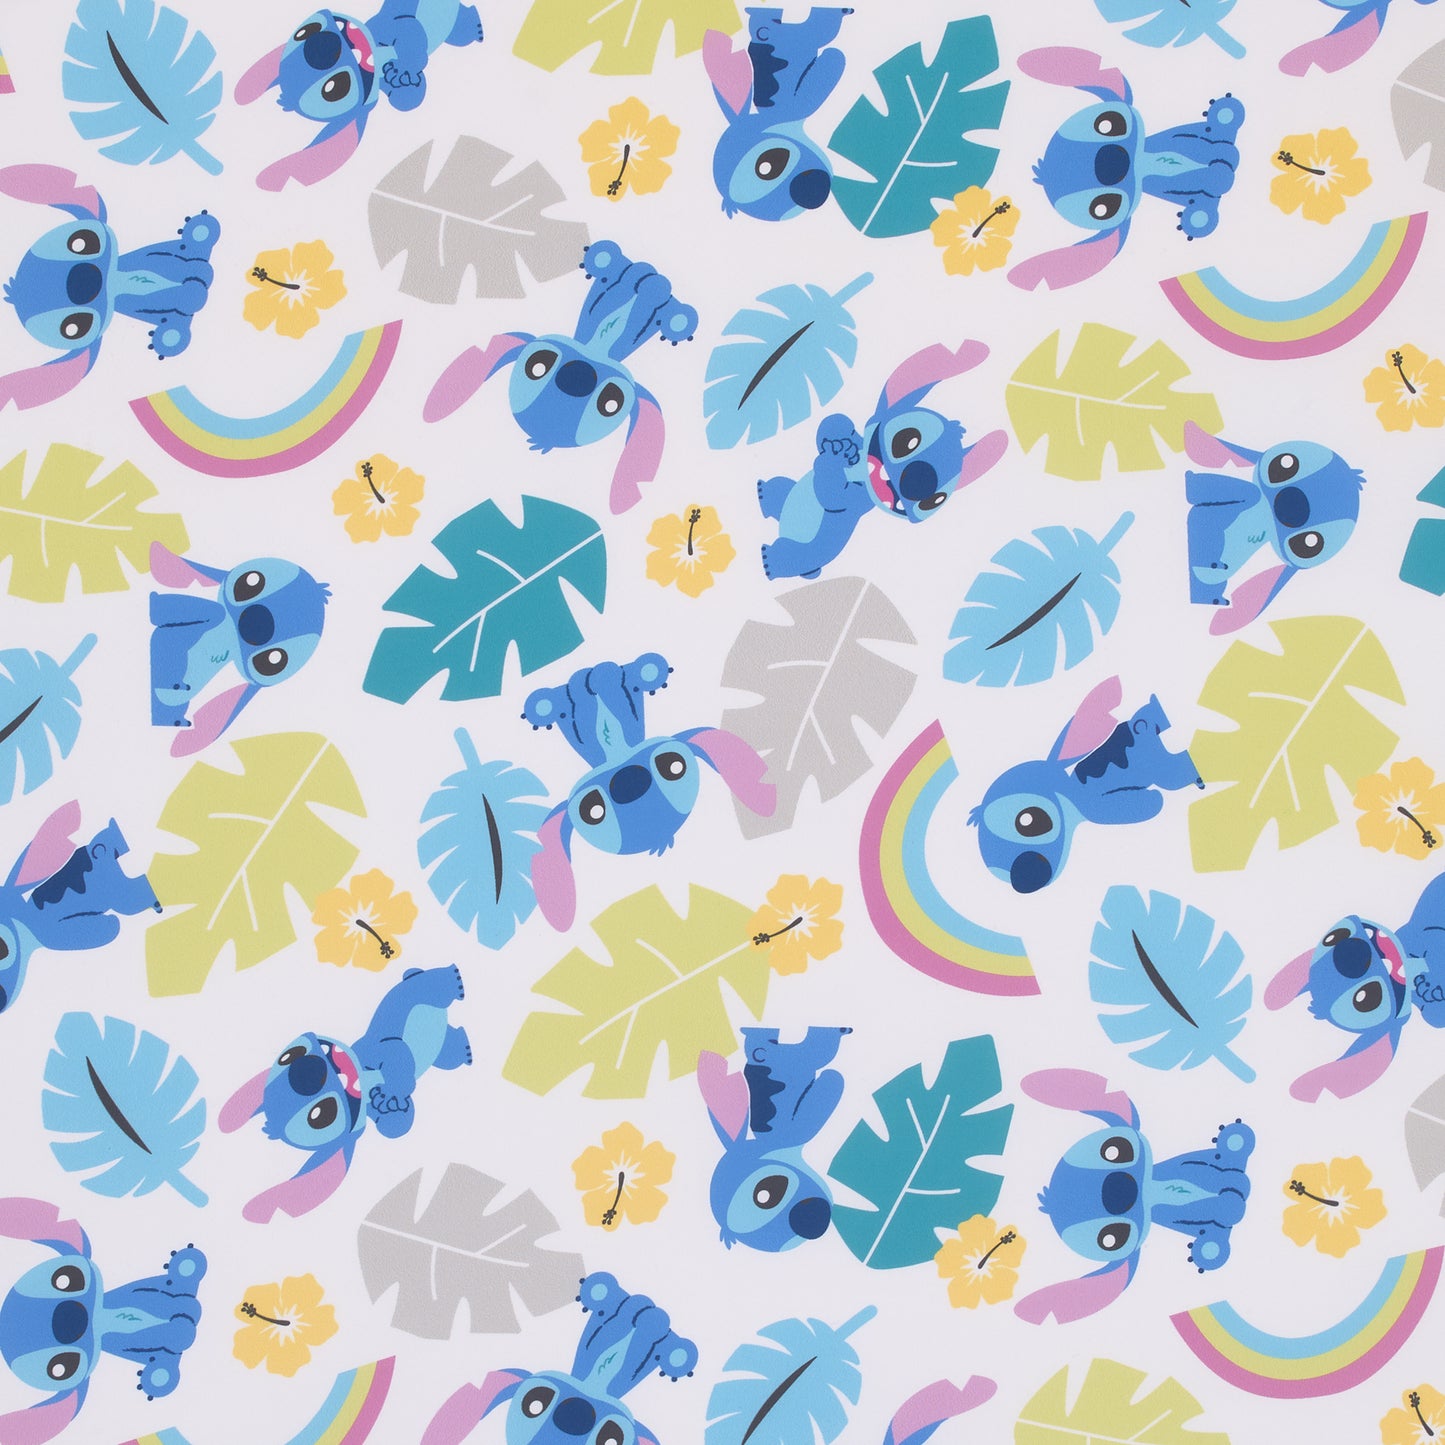 Disney Stitch Blue, Teal, Lime, and White Nursery Fitted Mini Crib Sheet